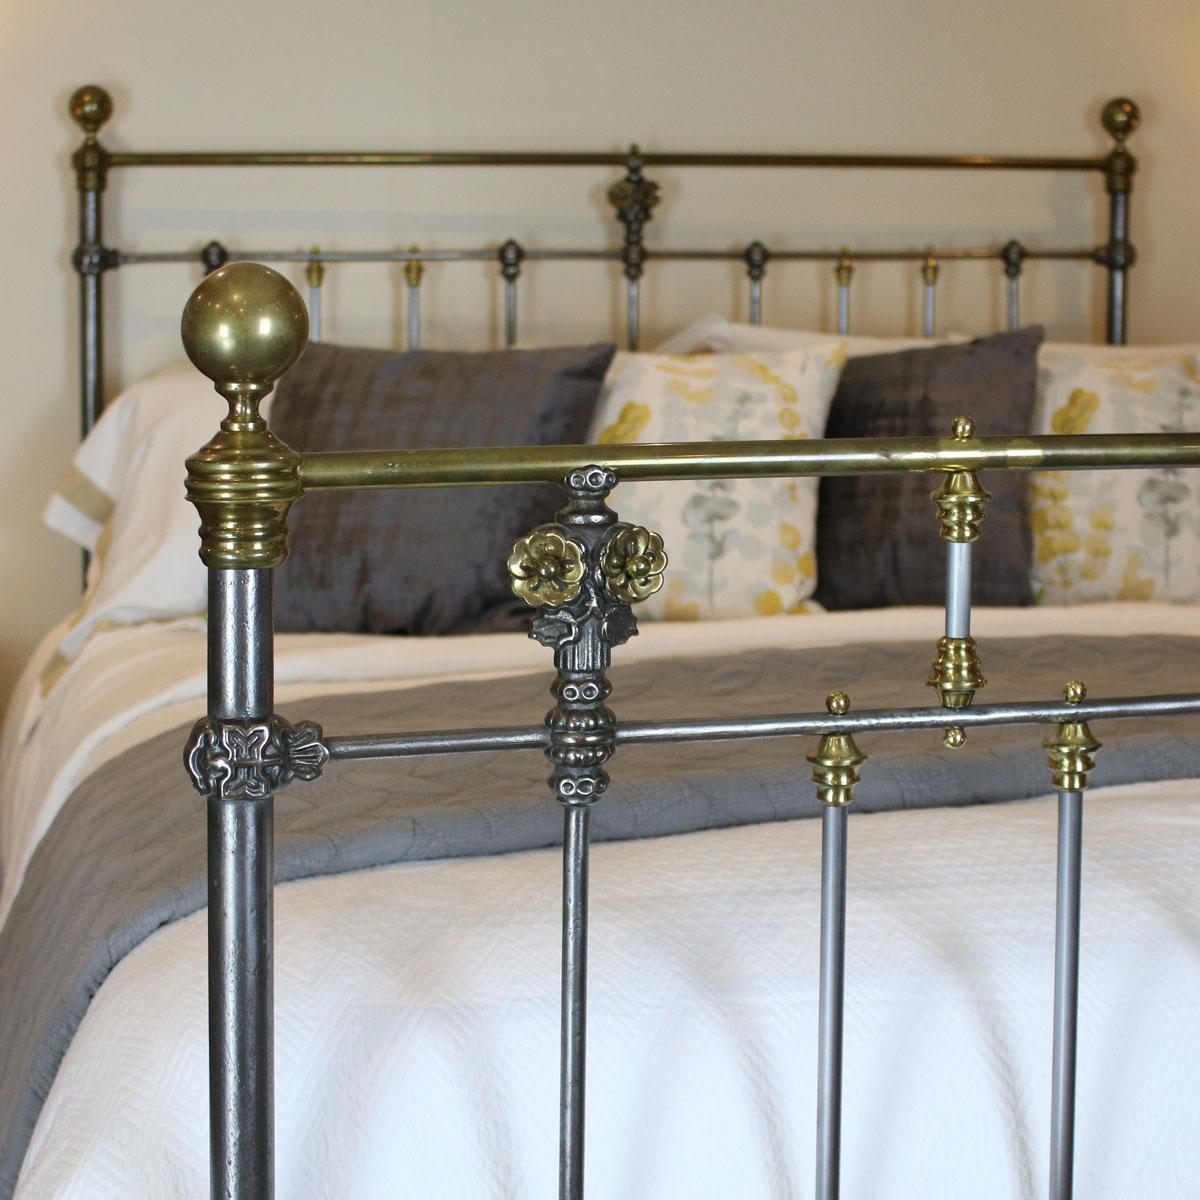 5ft burnished antique bed with decorative brass fittings. The brass has faded with age naturally but we can polish the brass if needed.

The price is for the bed frames alone. The bases, mattresses, bedding and bed linen are extra.